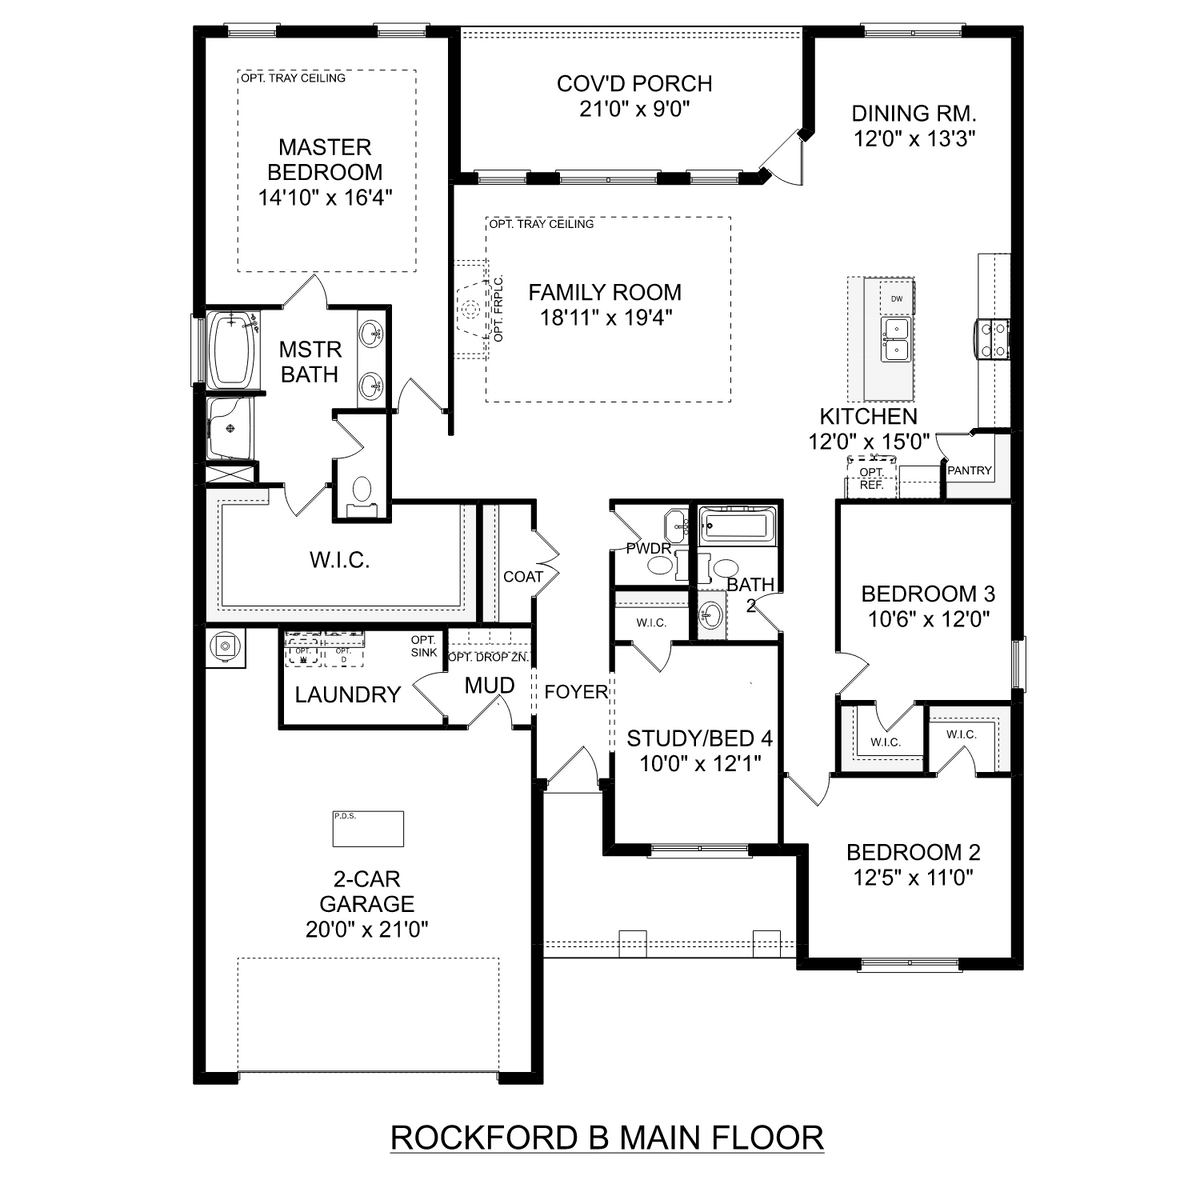 1 - The Rockford B floor plan layout for 1905 Rae Court in Davidson Homes' Cain Park community.